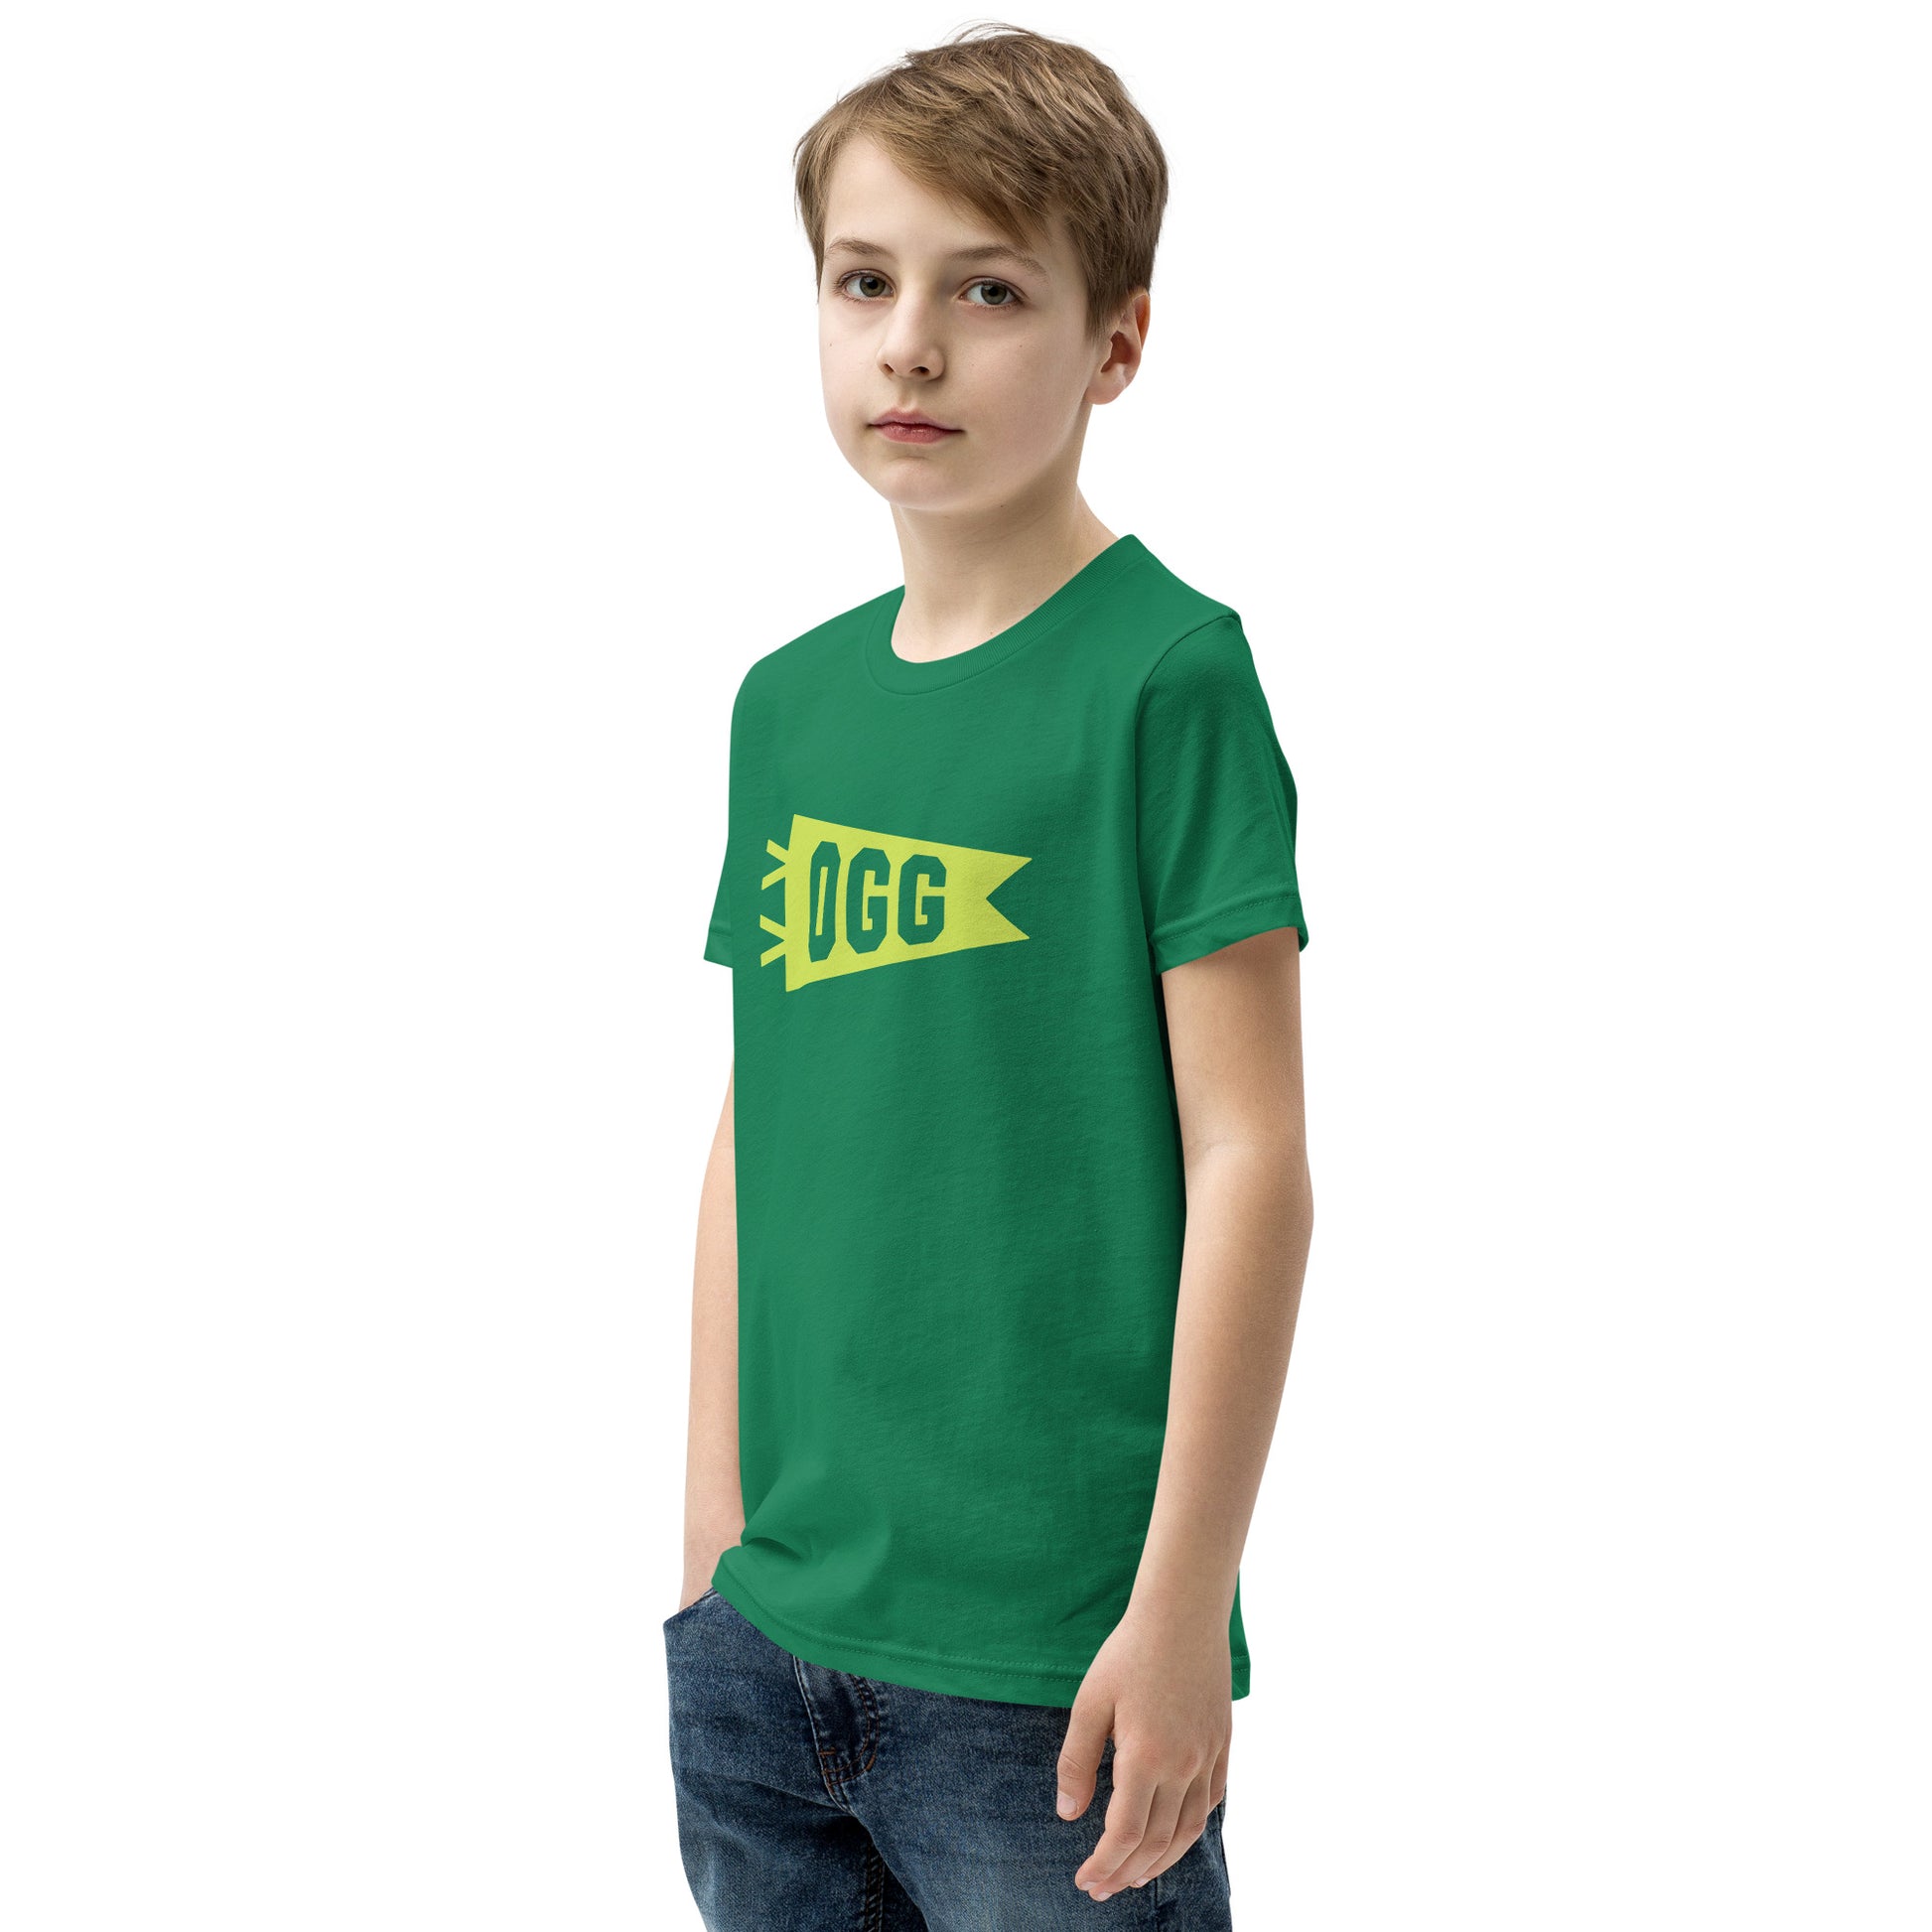 Kid's Airport Code Tee - Green Graphic • OGG Maui • YHM Designs - Image 06